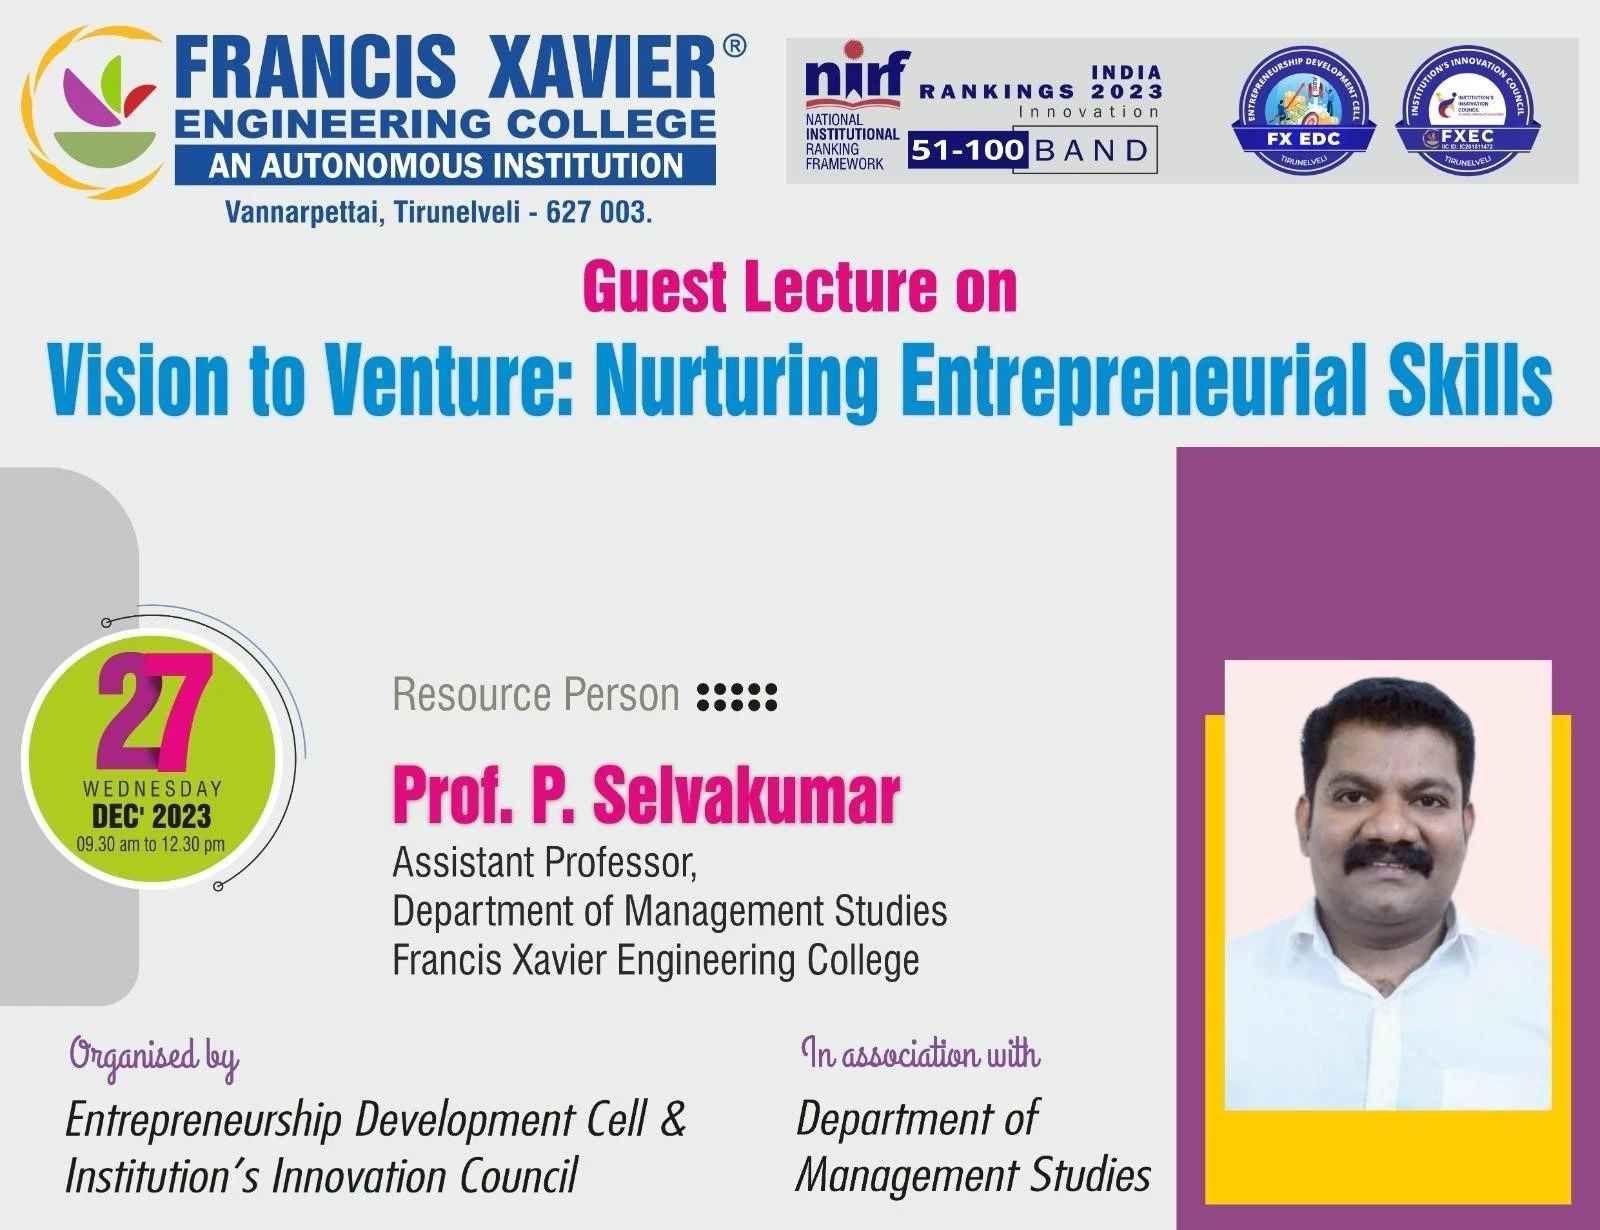    GUEST LECTURE ON VISION TO VENTURE: NURTURING ENTREPRENEURIAL SKILLS